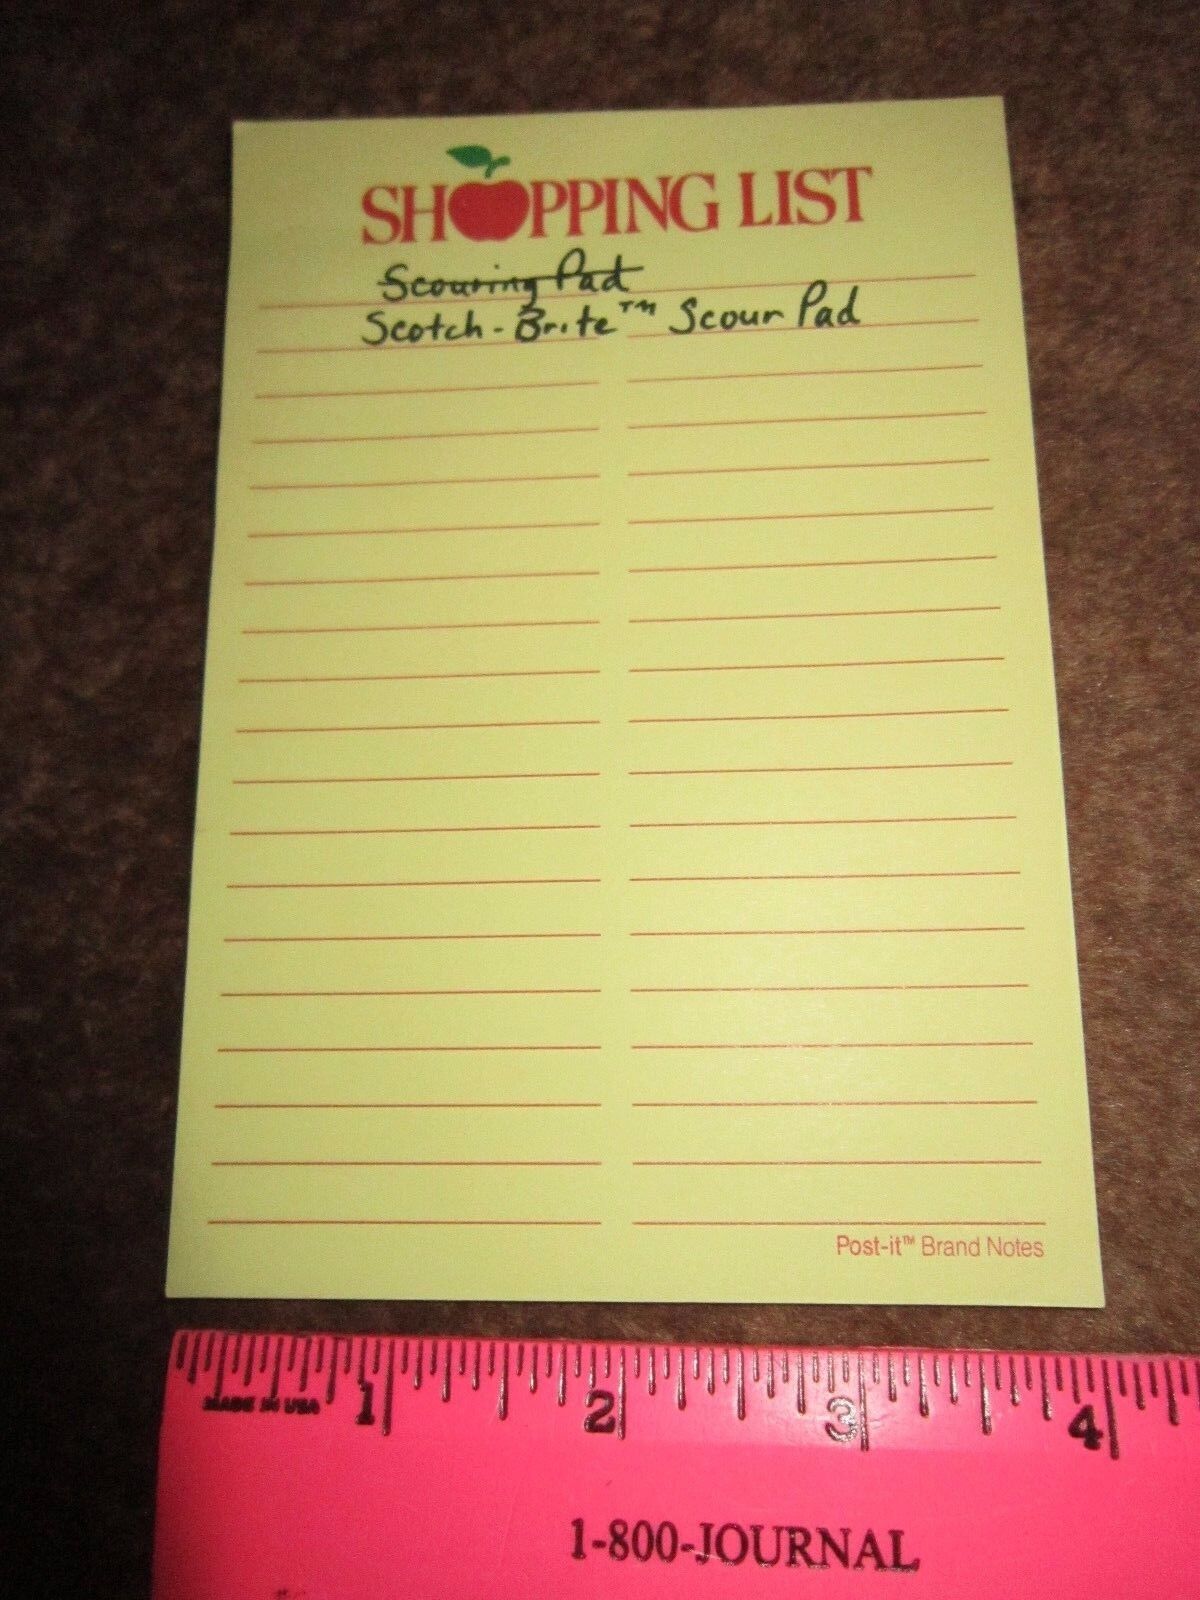 Shopping List Post It Brand Notes Advertising Scotch-Brite Scour Pad Paper